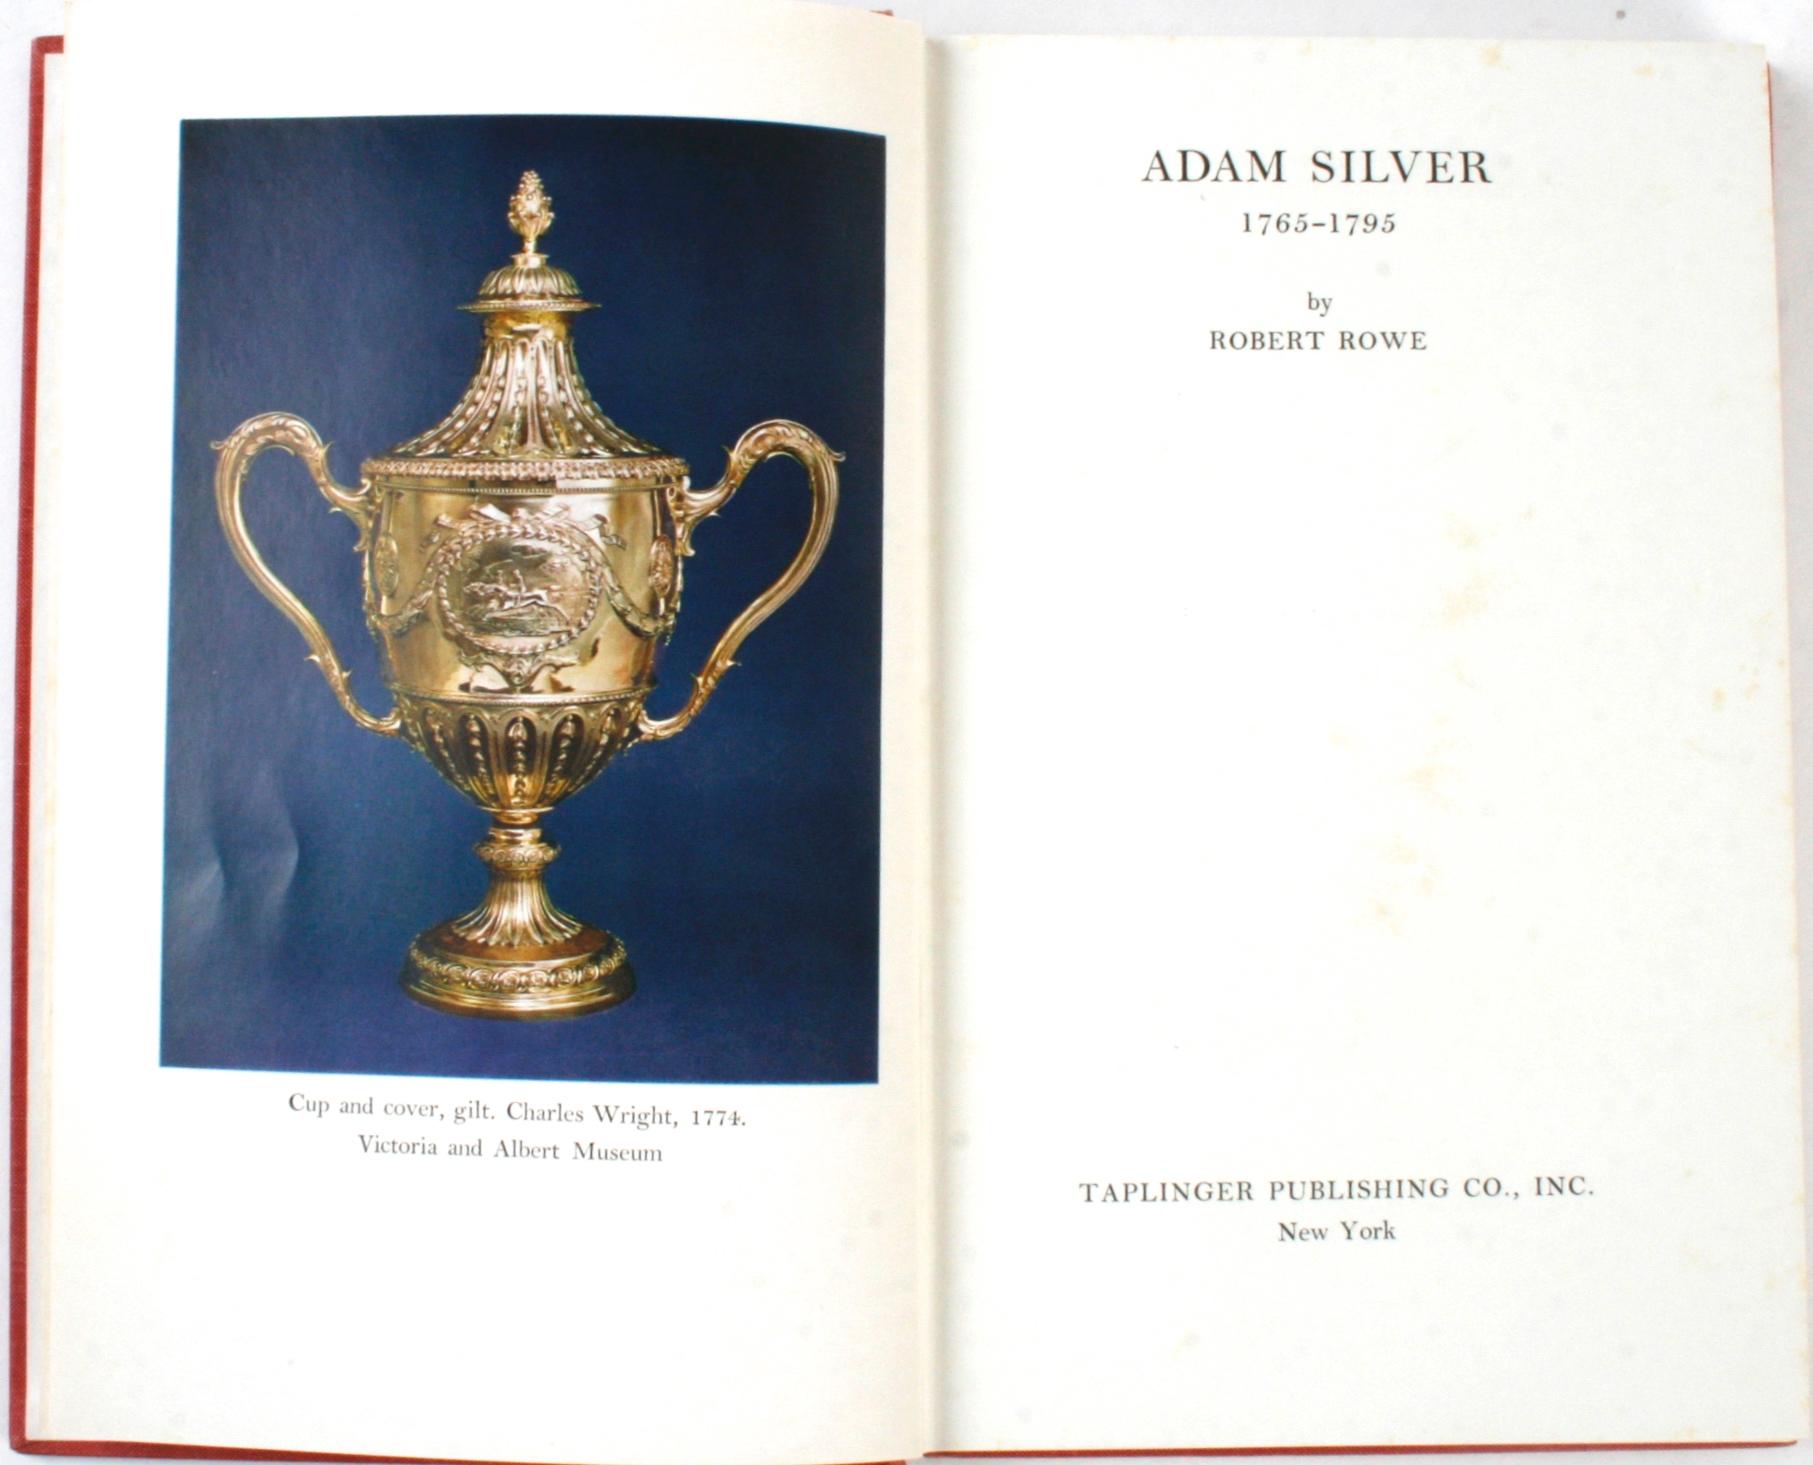 Adam Silver 1765-1795 by Robert Rowe. New York: Tapliger Publishing Co., Inc. 1965. First American edition hardcover with no dust jacket. 94 pages of text and additional pages with 96 plates. A book on the silver designed by the Scottish